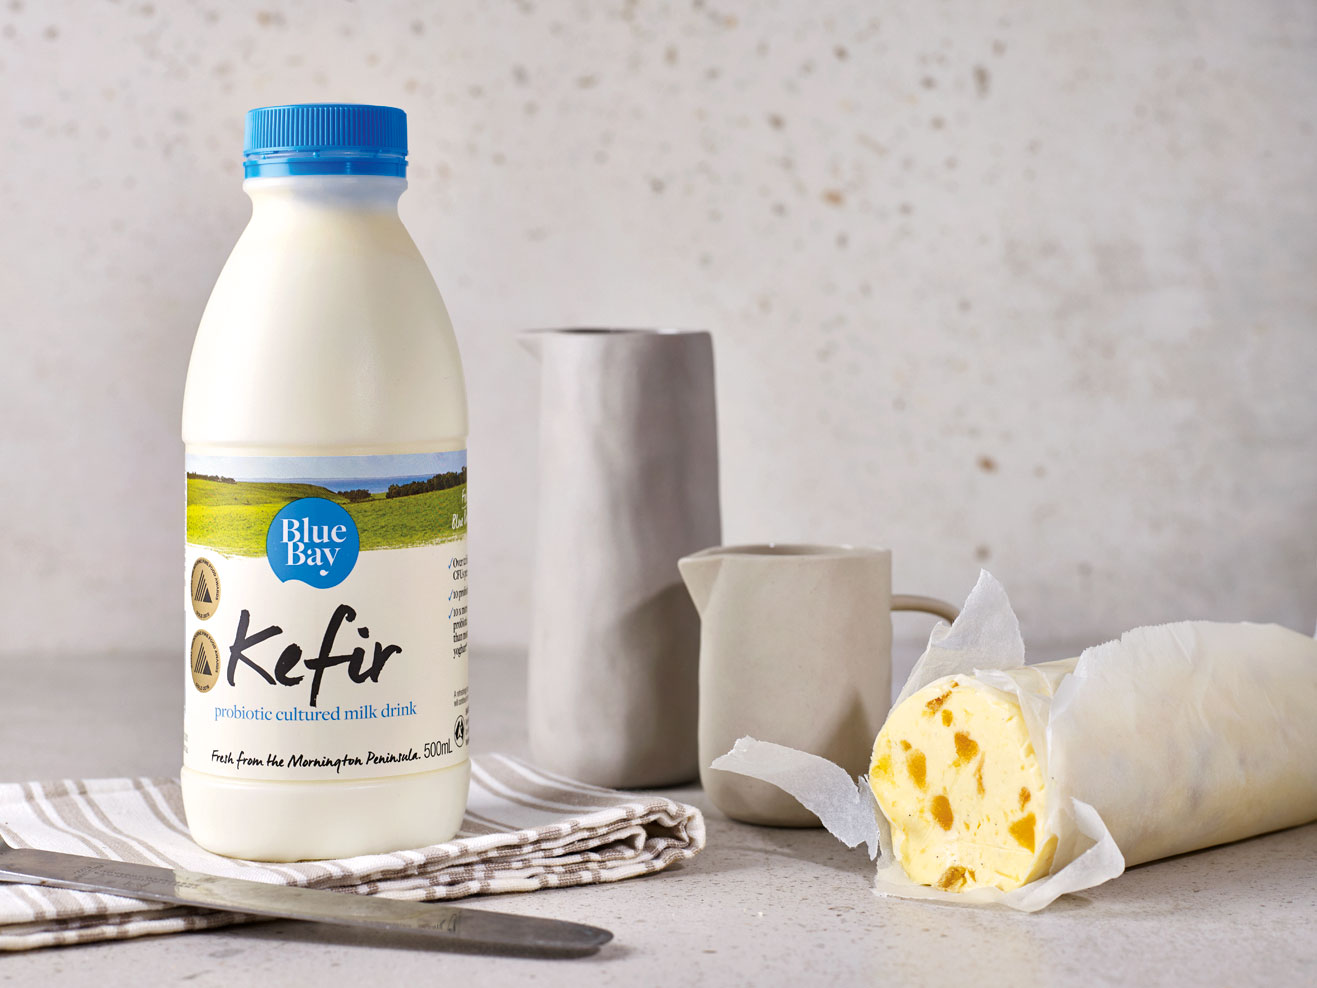 Blue Bay Kefir, from Mornington, Victoria has no added thickeners or preservatives – it can last a good six weeks on the fridge shelf.